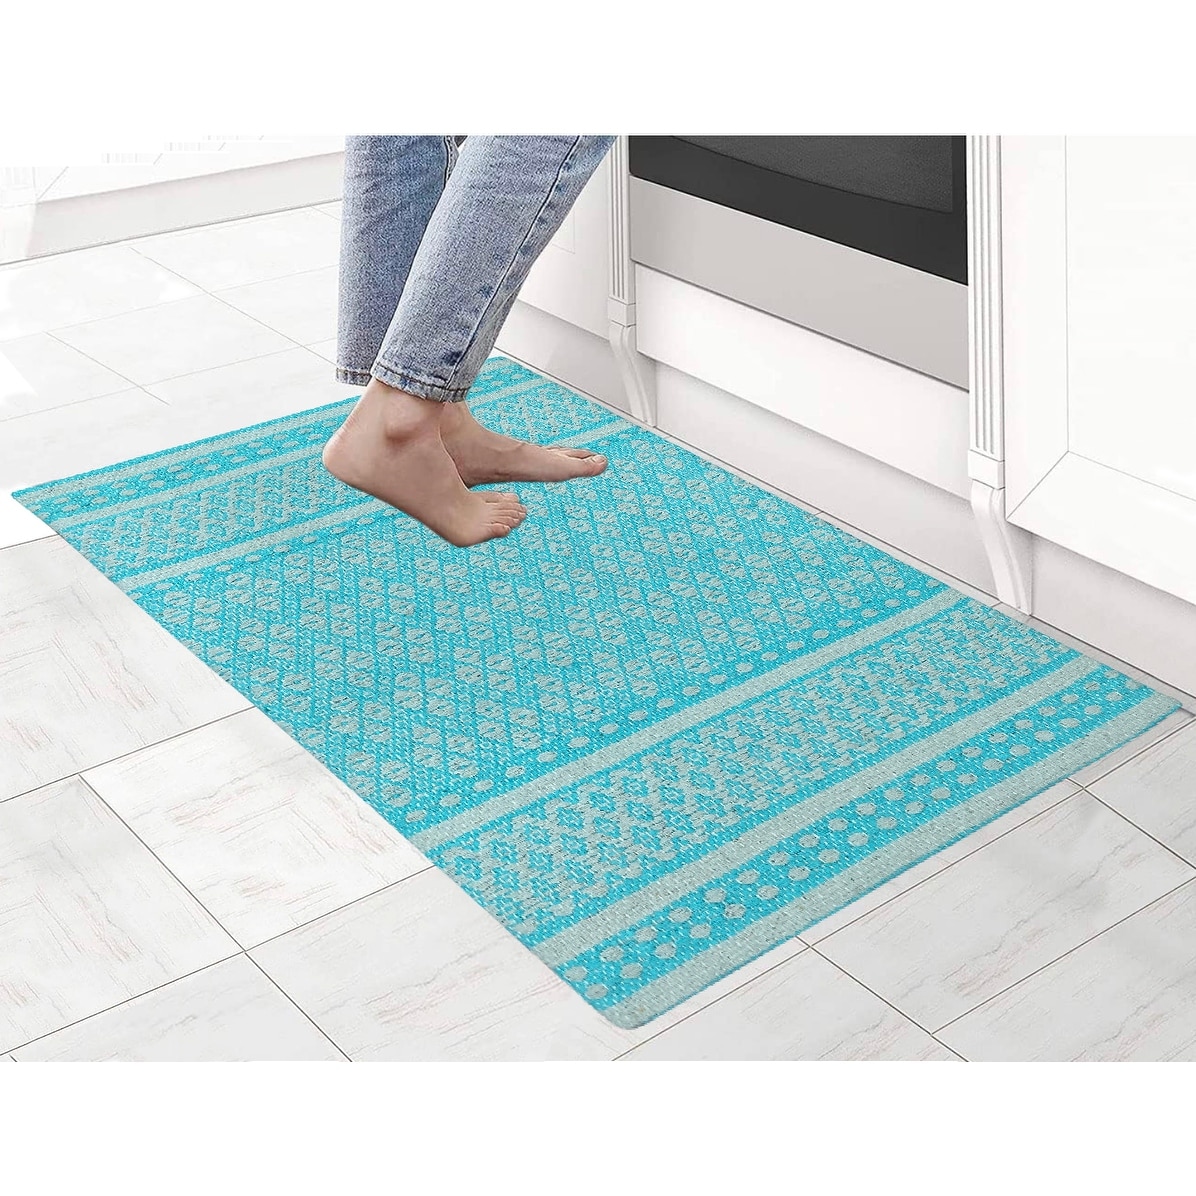 https://ak1.ostkcdn.com/images/products/is/images/direct/fd4af2d2522b48bcdb7ccabd6d765c51e4c41e4c/Woven-Cotton-Anti-Fatigue-Cushioned-Kitchen-%7C-Doormat-%7C-Bathroom-18%22-x-30%22-Mats-With-Foam-Backing-Anti-Slip.jpg